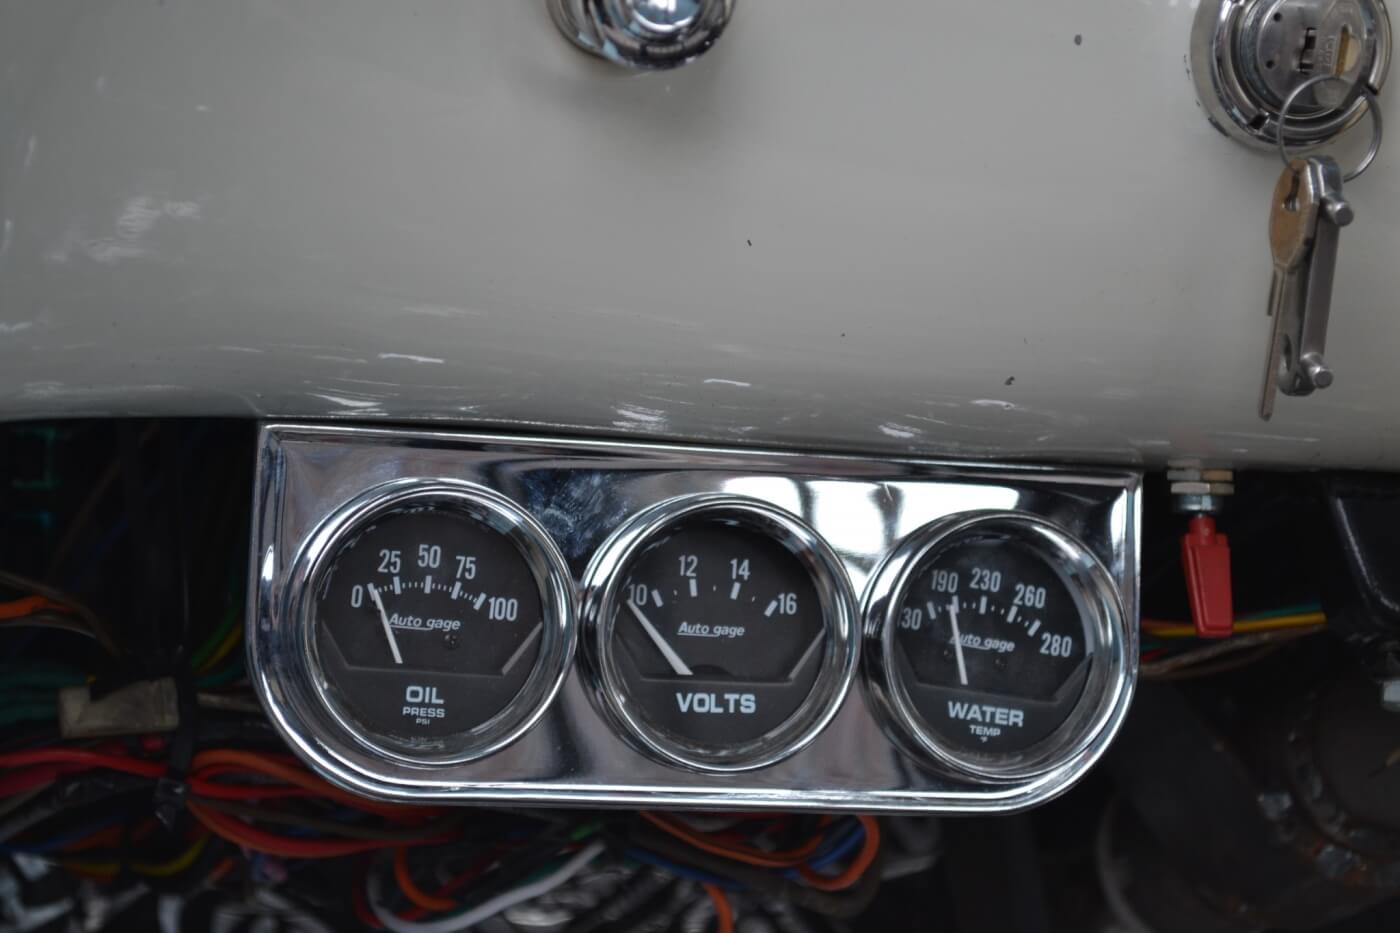 Simple oil, water, and voltage gauges are the only one found on the truck. Since Bill rarely goes past Level 3 with his programmer, he never felt the need to install a boost or EGT gauge.